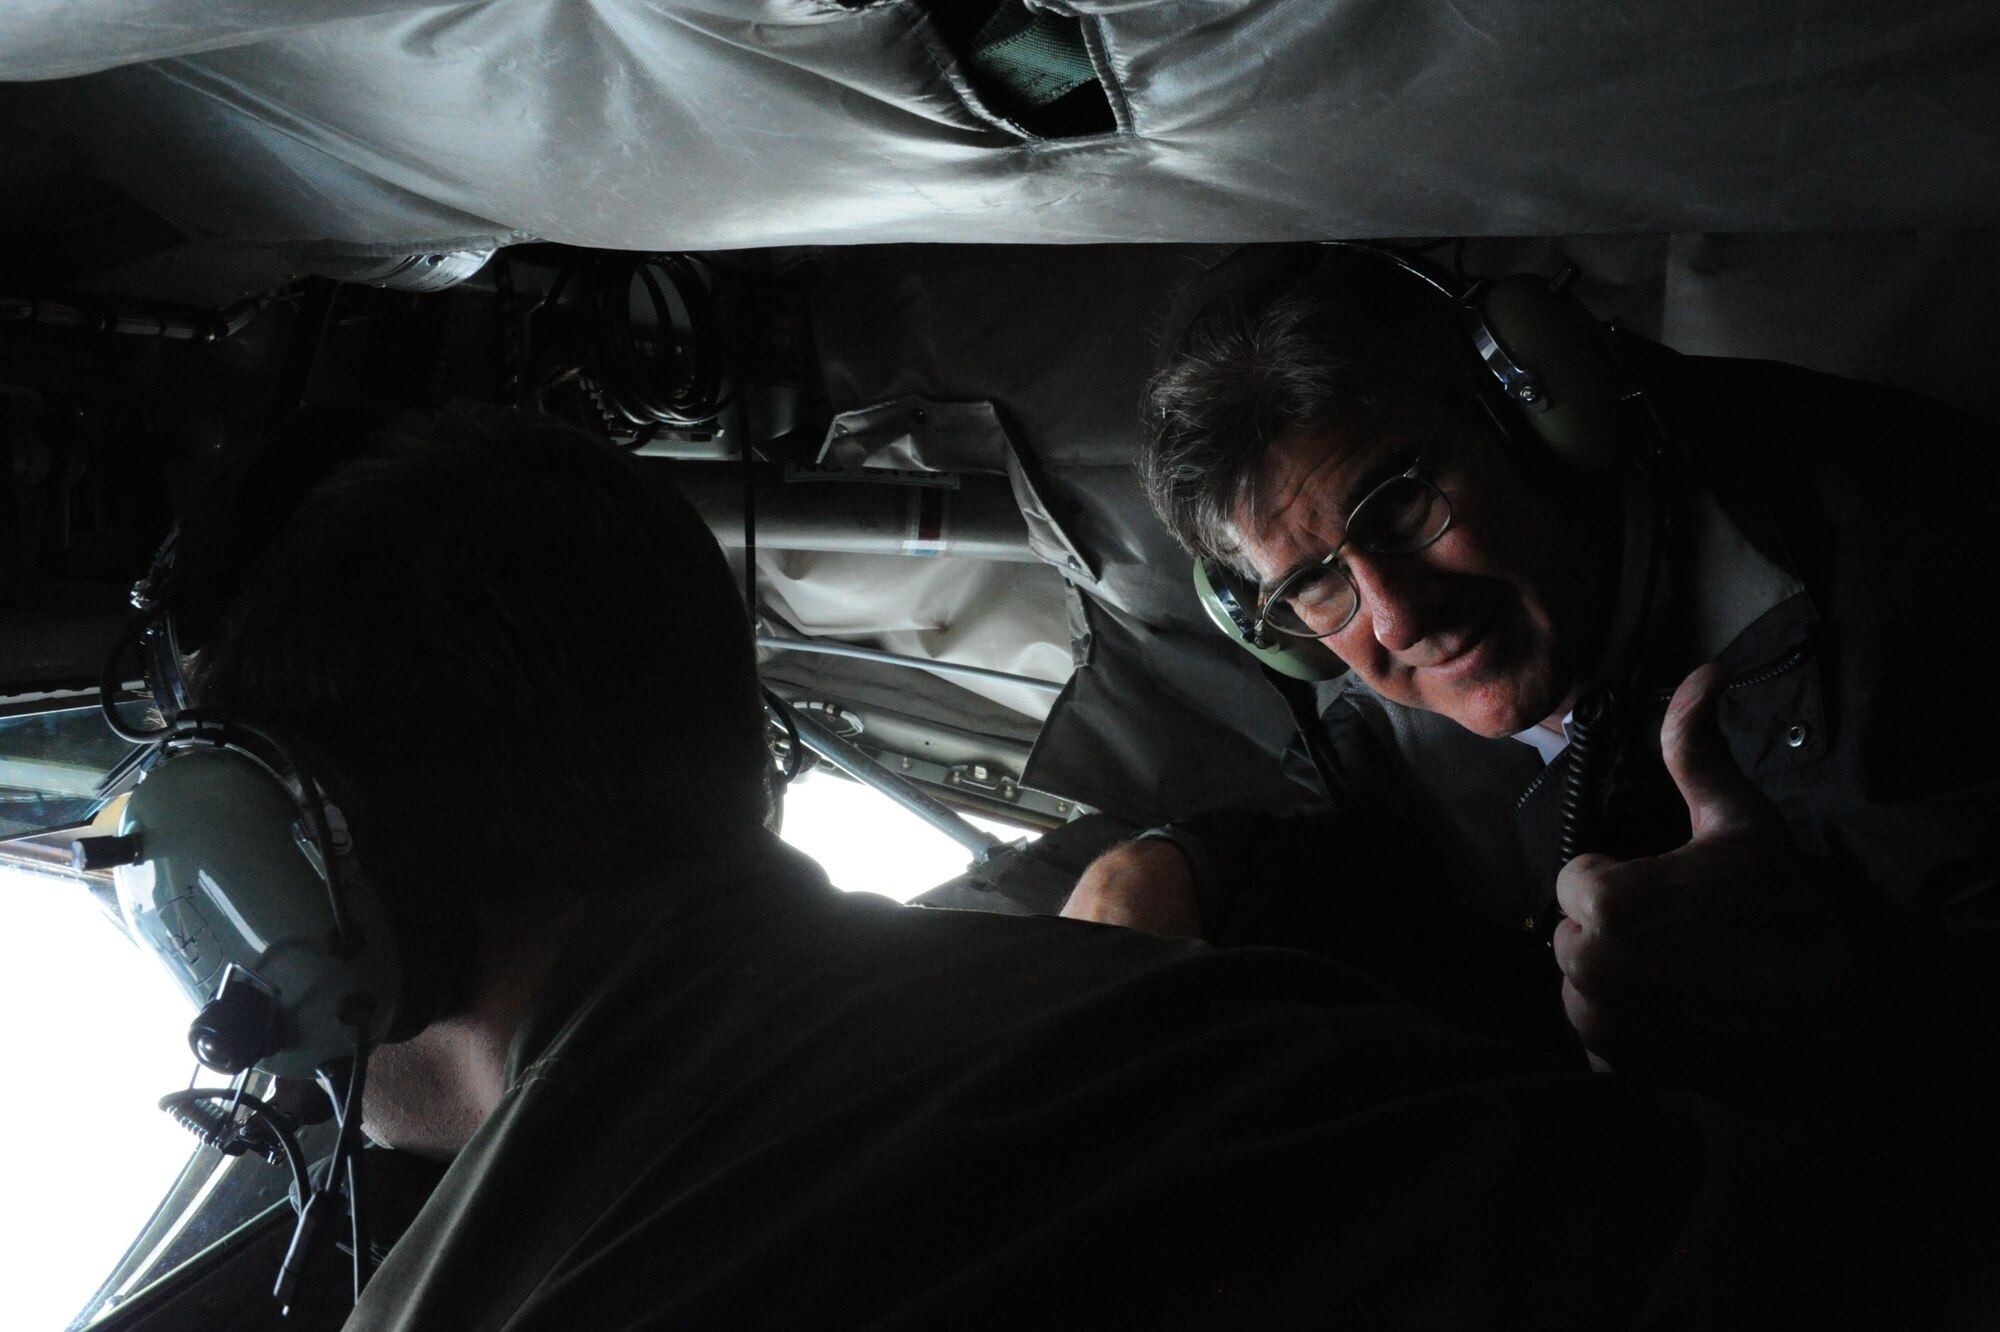 Robert Barber, U.S. Ambassador to the Republic of Iceland, shows his approval of Icelandic Air Surveillance operations while flying with the 916th Air Refueling Wing, Air Force Reserve Command, Seymour Johnson, N.C., over Iceland, April 9, 2016. Barber observed refueling operations from the boom pod of the KC-135 and spoke to Airmen about Iceland’s appreciation in conducting the IAS mission ensuring security for the United States and NATO.  (U.S. Air Force photo by Master Sgt. Kevin Nichols/Released)